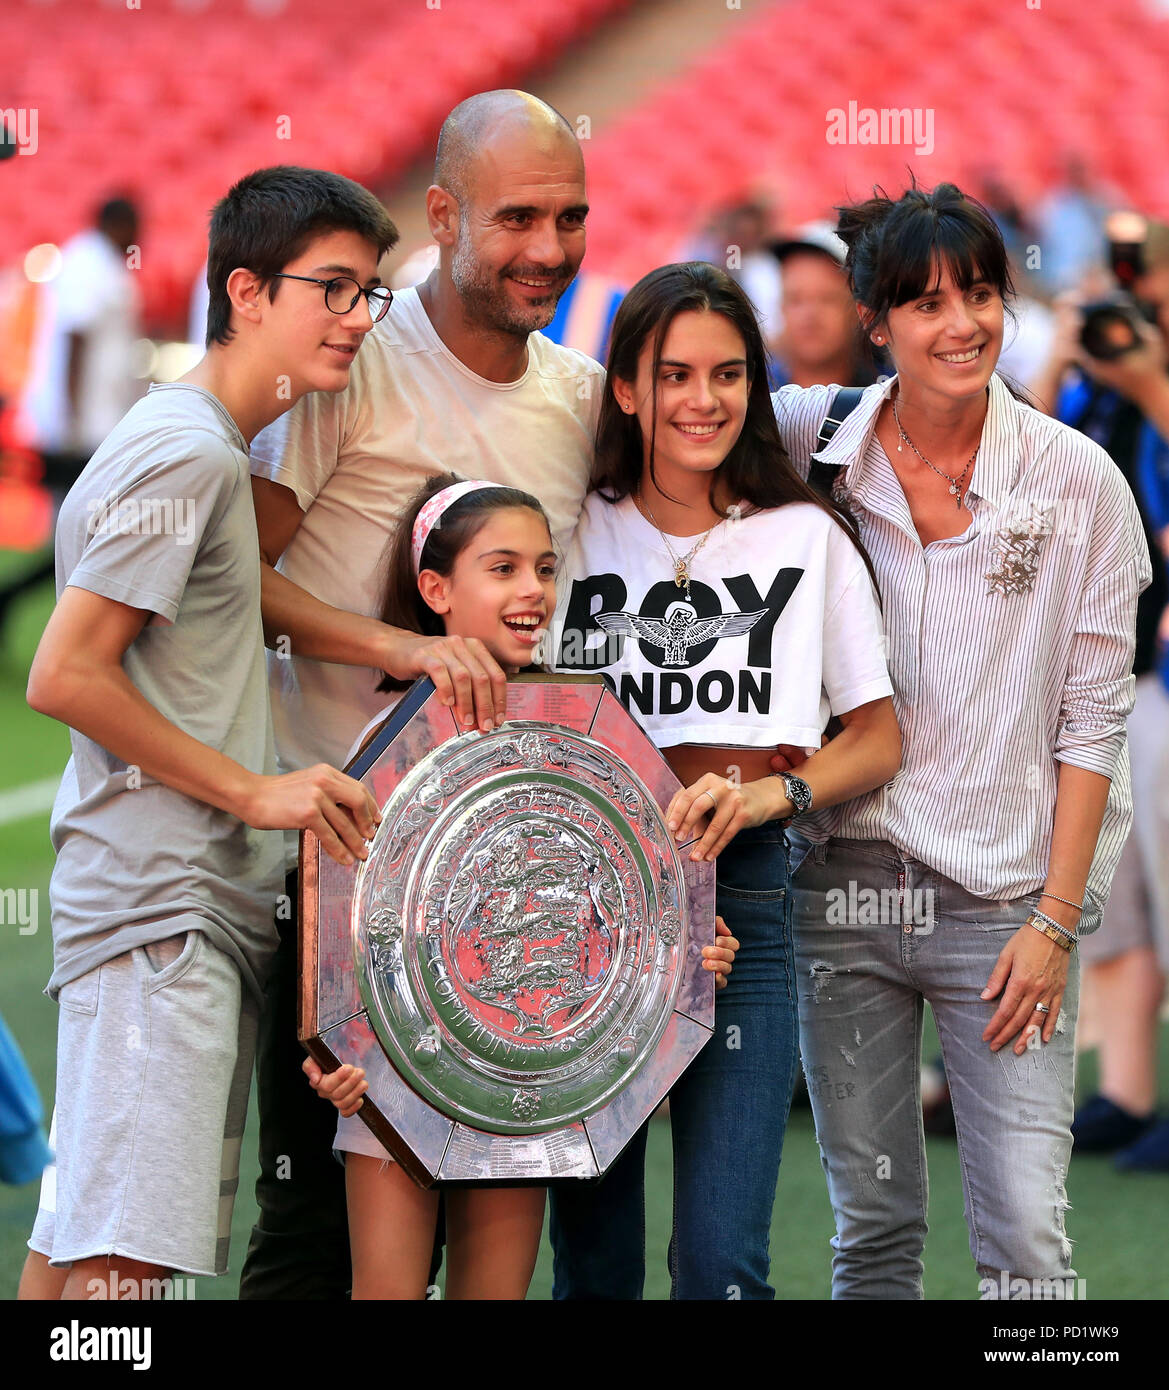 Manchester City manager Josep Guardiola with the Community Shield trophy and family wife Cristina Serra and children Valentina Guardiola, Maria Guardiola and Marius Guardiola after the Community Shield match at Wembley Stadium, London. Stock Photo